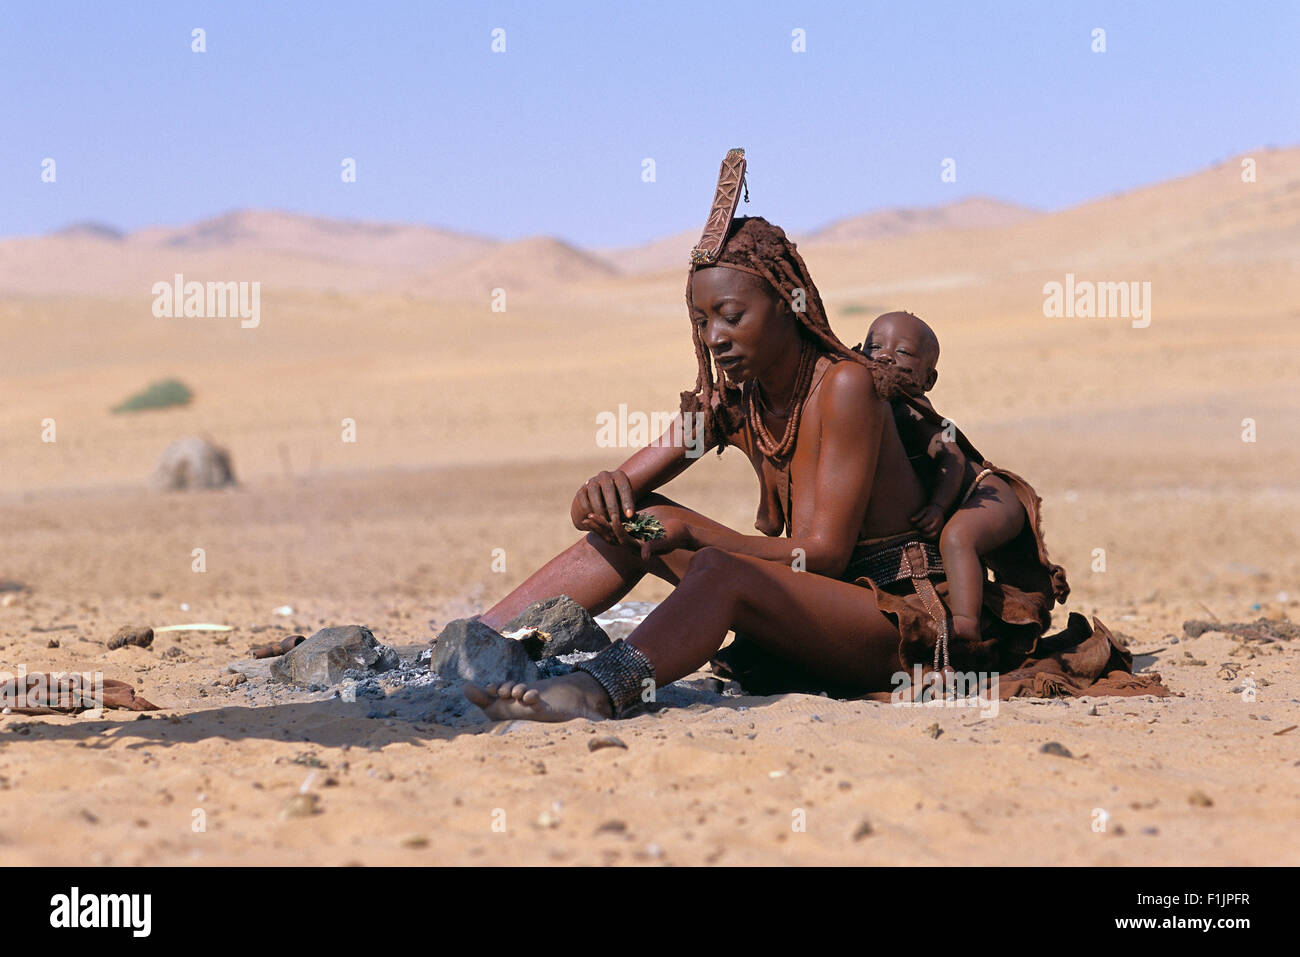 Himba Woman and Child Sitting Near Fire, Namibia, Africa Stock Photo